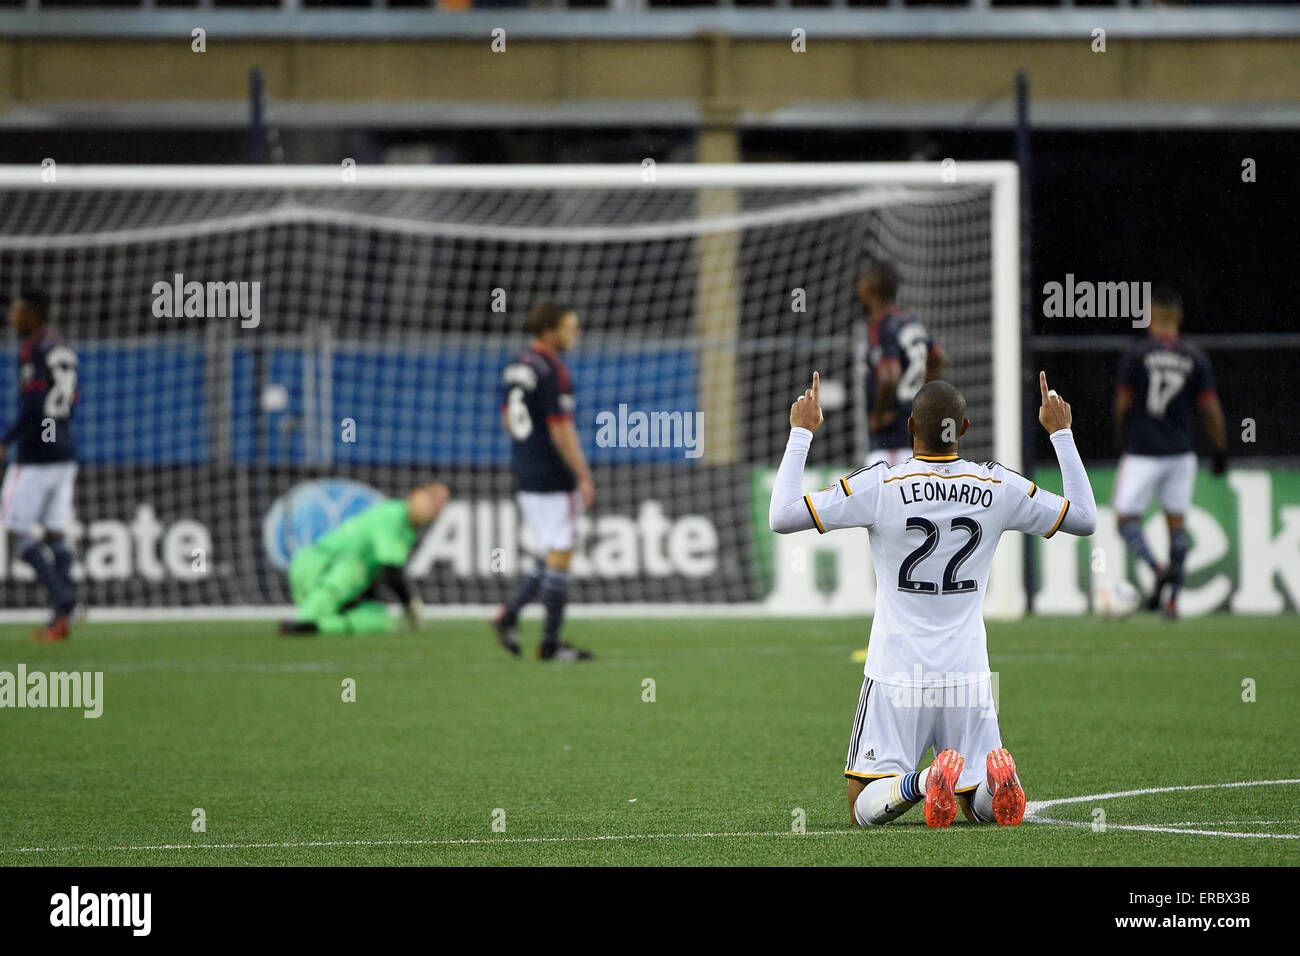 Foxborough, Massachusetts, USA. 31st May, 2015. Los Angeles Galaxy defender Leonardo (22) reacts to a teammates goal during the MLS game between Los Angeles Galaxy and the New England Revolution held at Gillette Stadium in Foxborough Massachusetts. Revolution tied Galaxy 2-2. Eric Canha/CSM/Alamy Live News Stock Photo